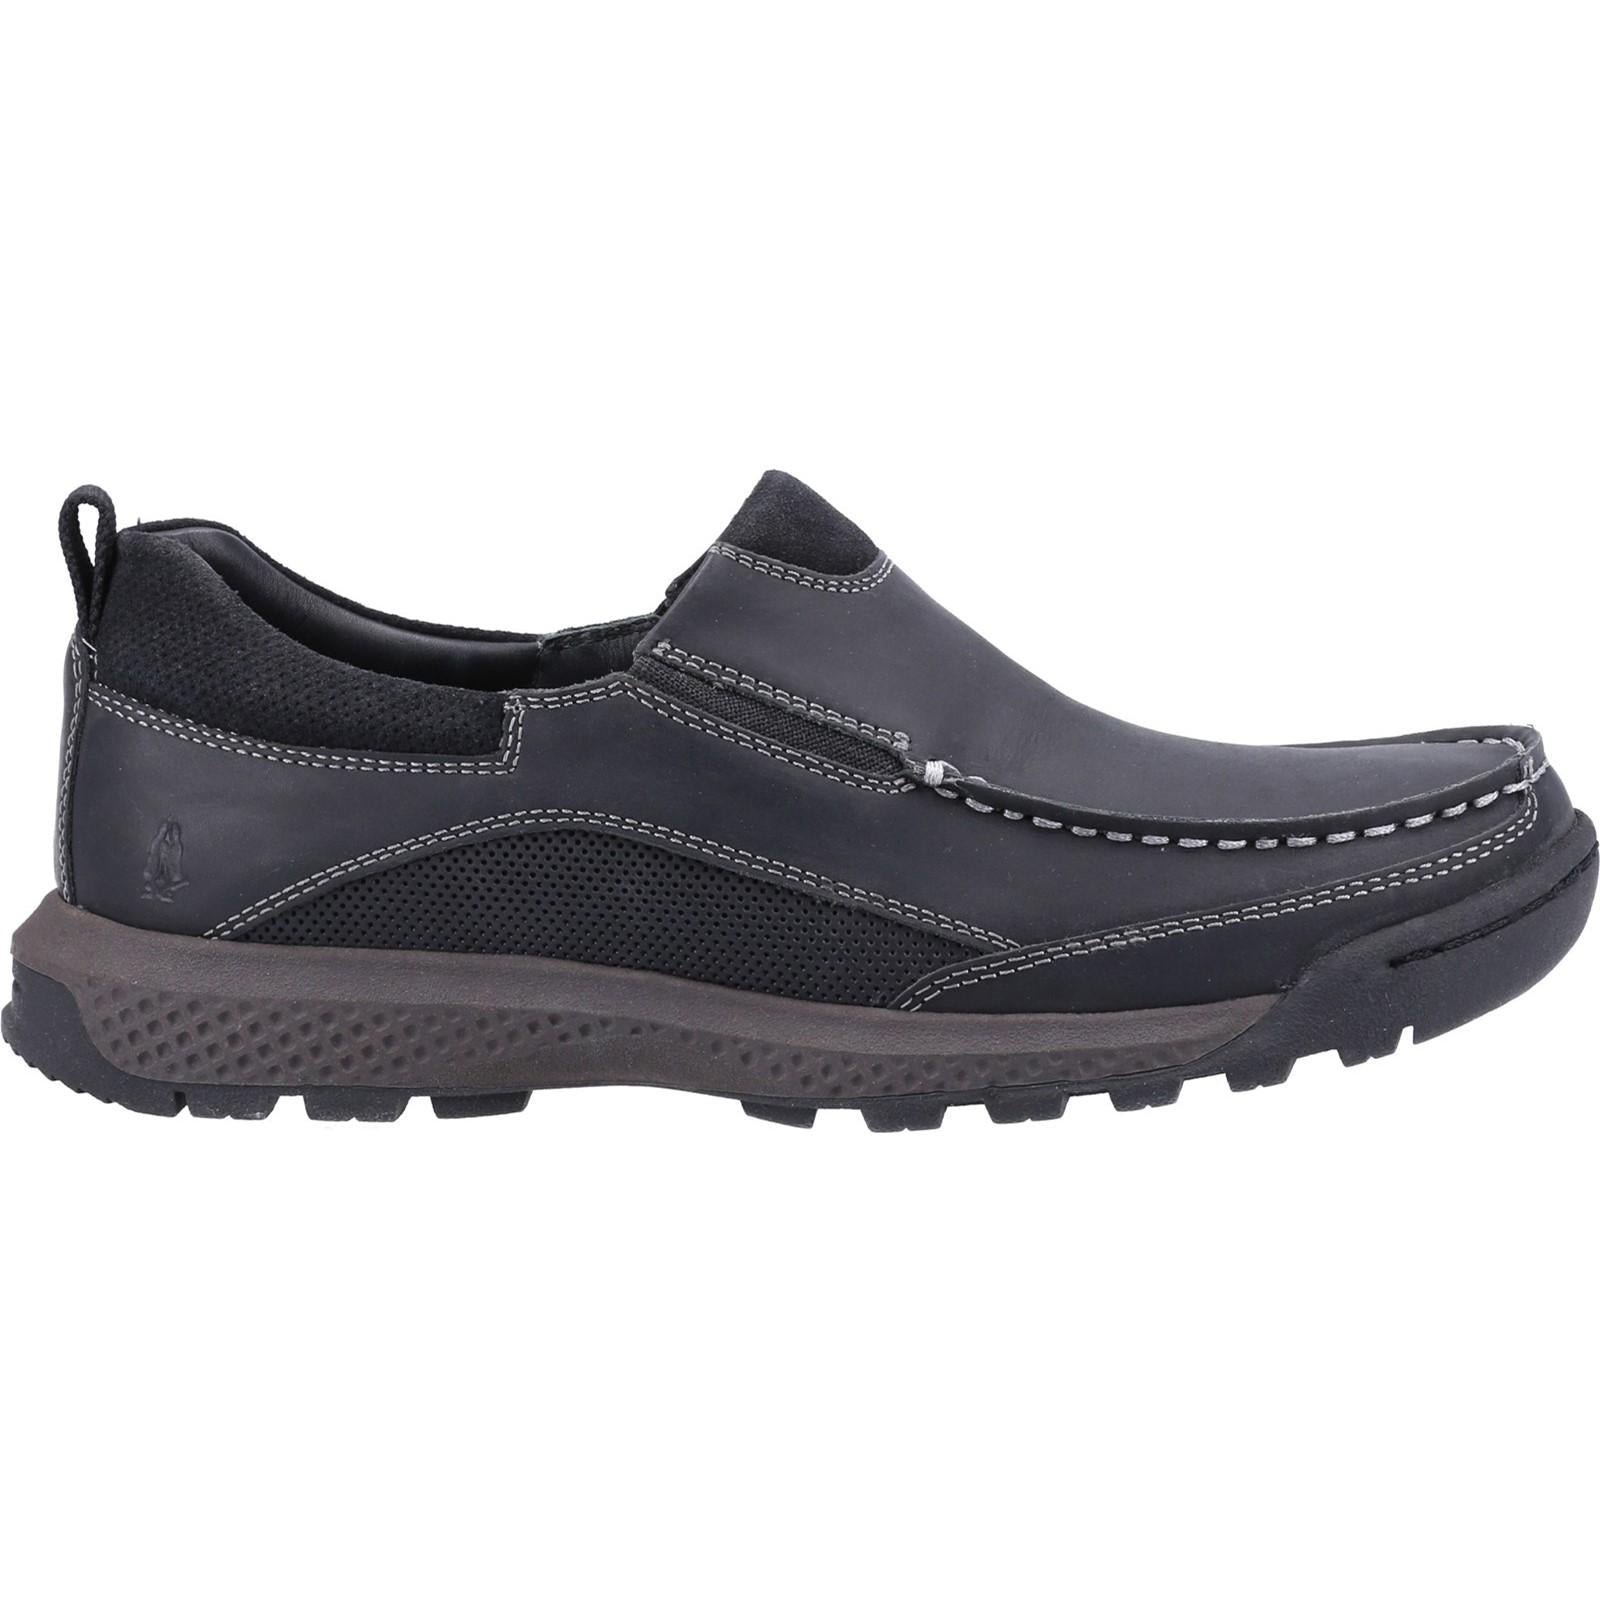 Hush Puppies Duncan Slip On Shoes